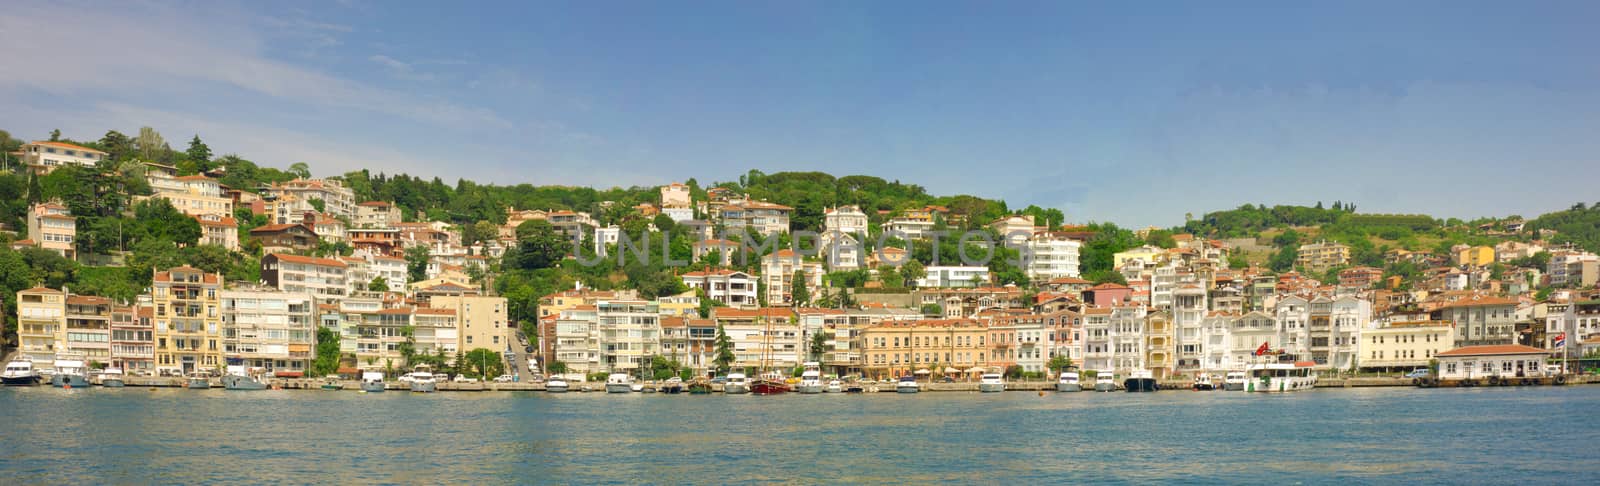 Panoramic view of a luxury residential area amonst trees on the edge of a large river